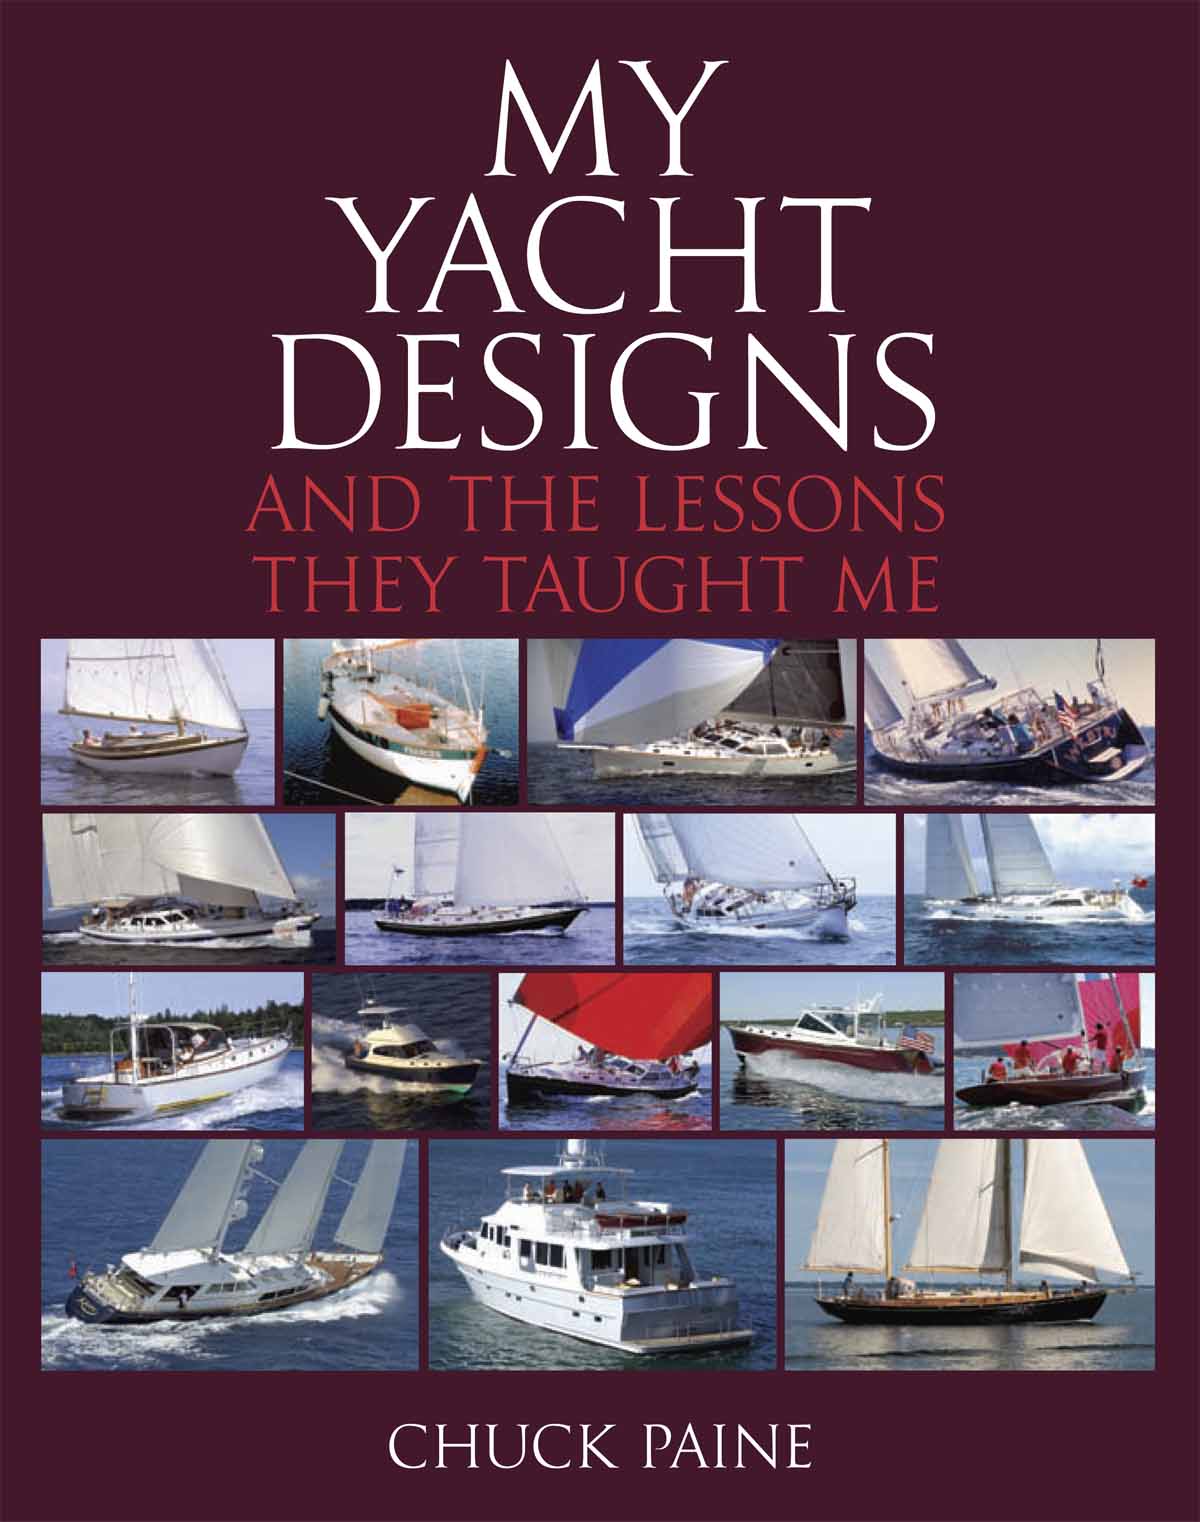 My Yacht Designs: The Book